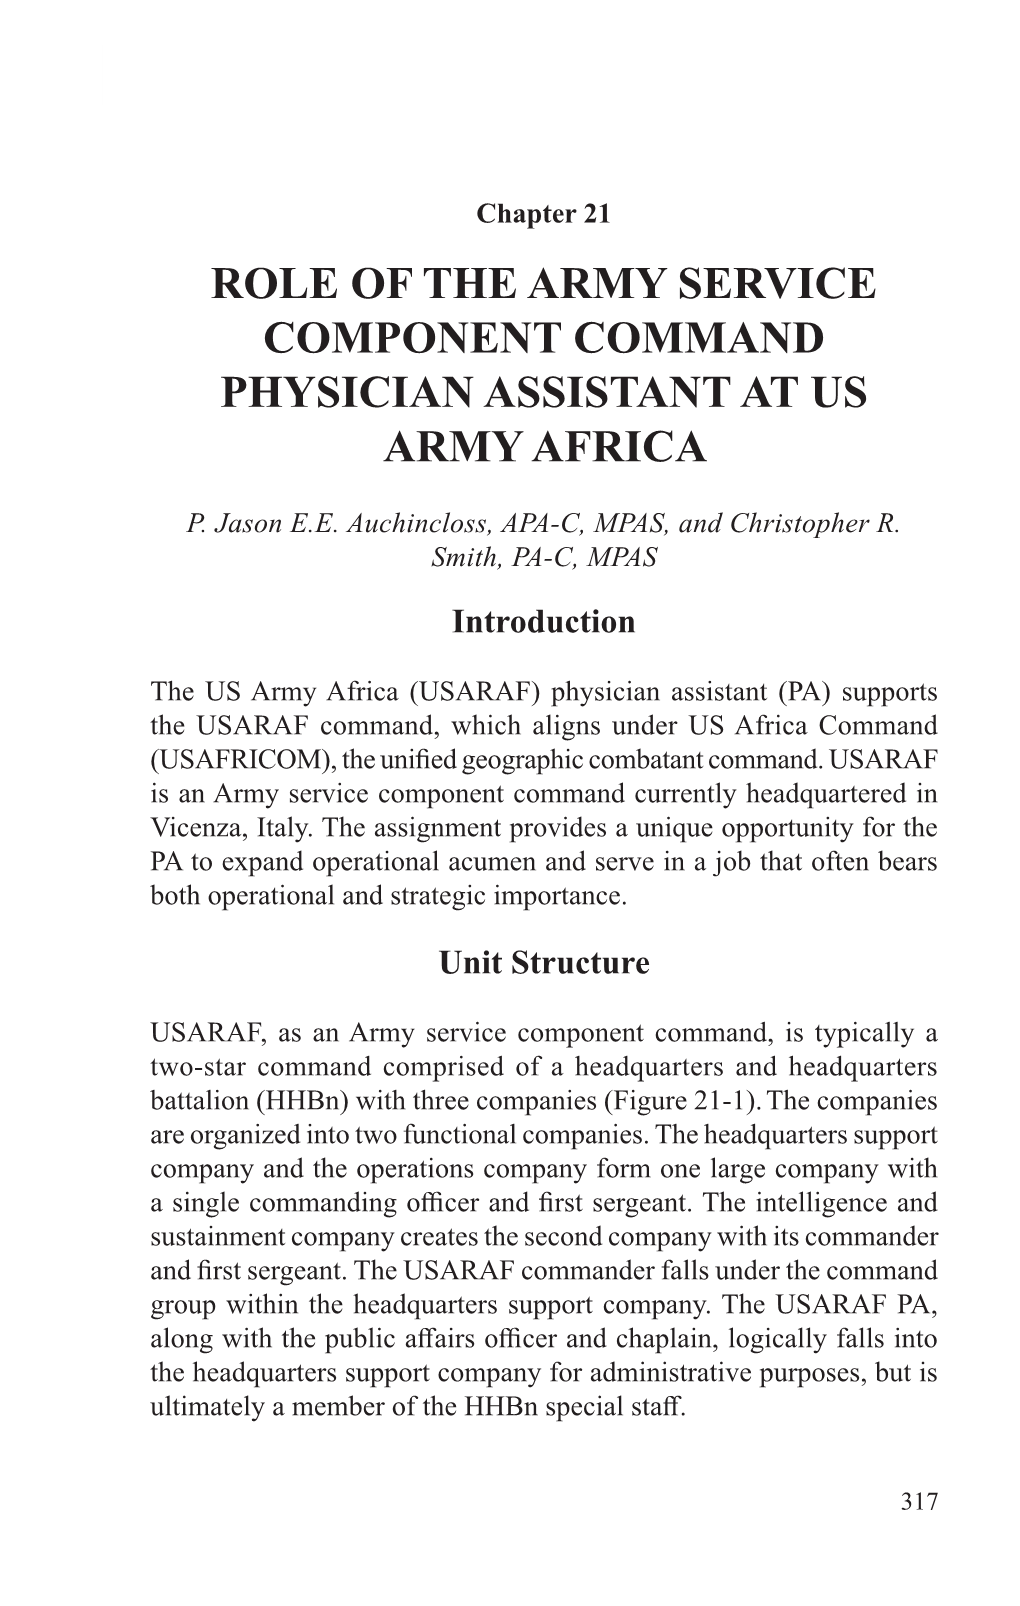 Role of the Army Service Component Command Physician Assistant at Us Army Africa